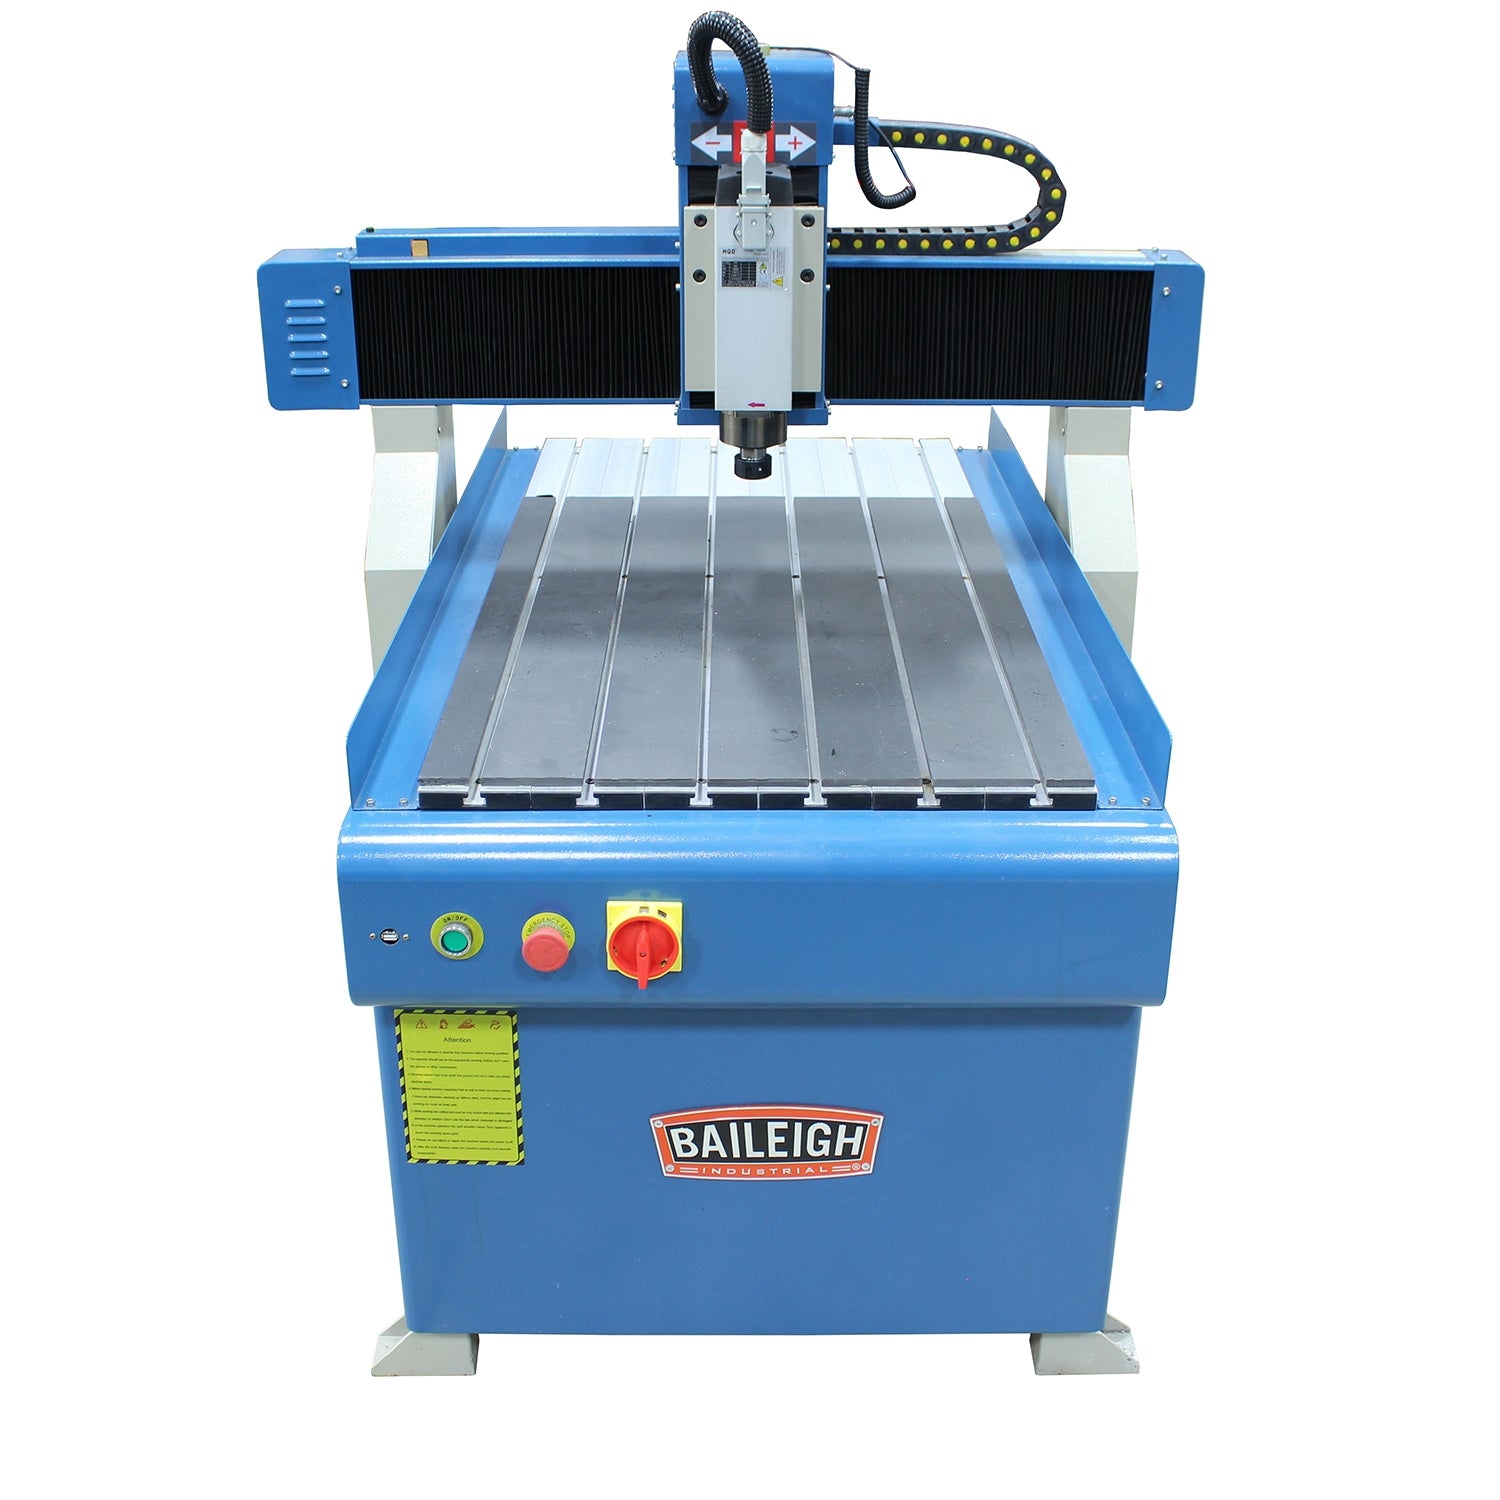 Baileigh WR-32 220V 1 Phase 2' x 3' CNC Advertising Router Table, 4.2hp Spindle, and Software Package